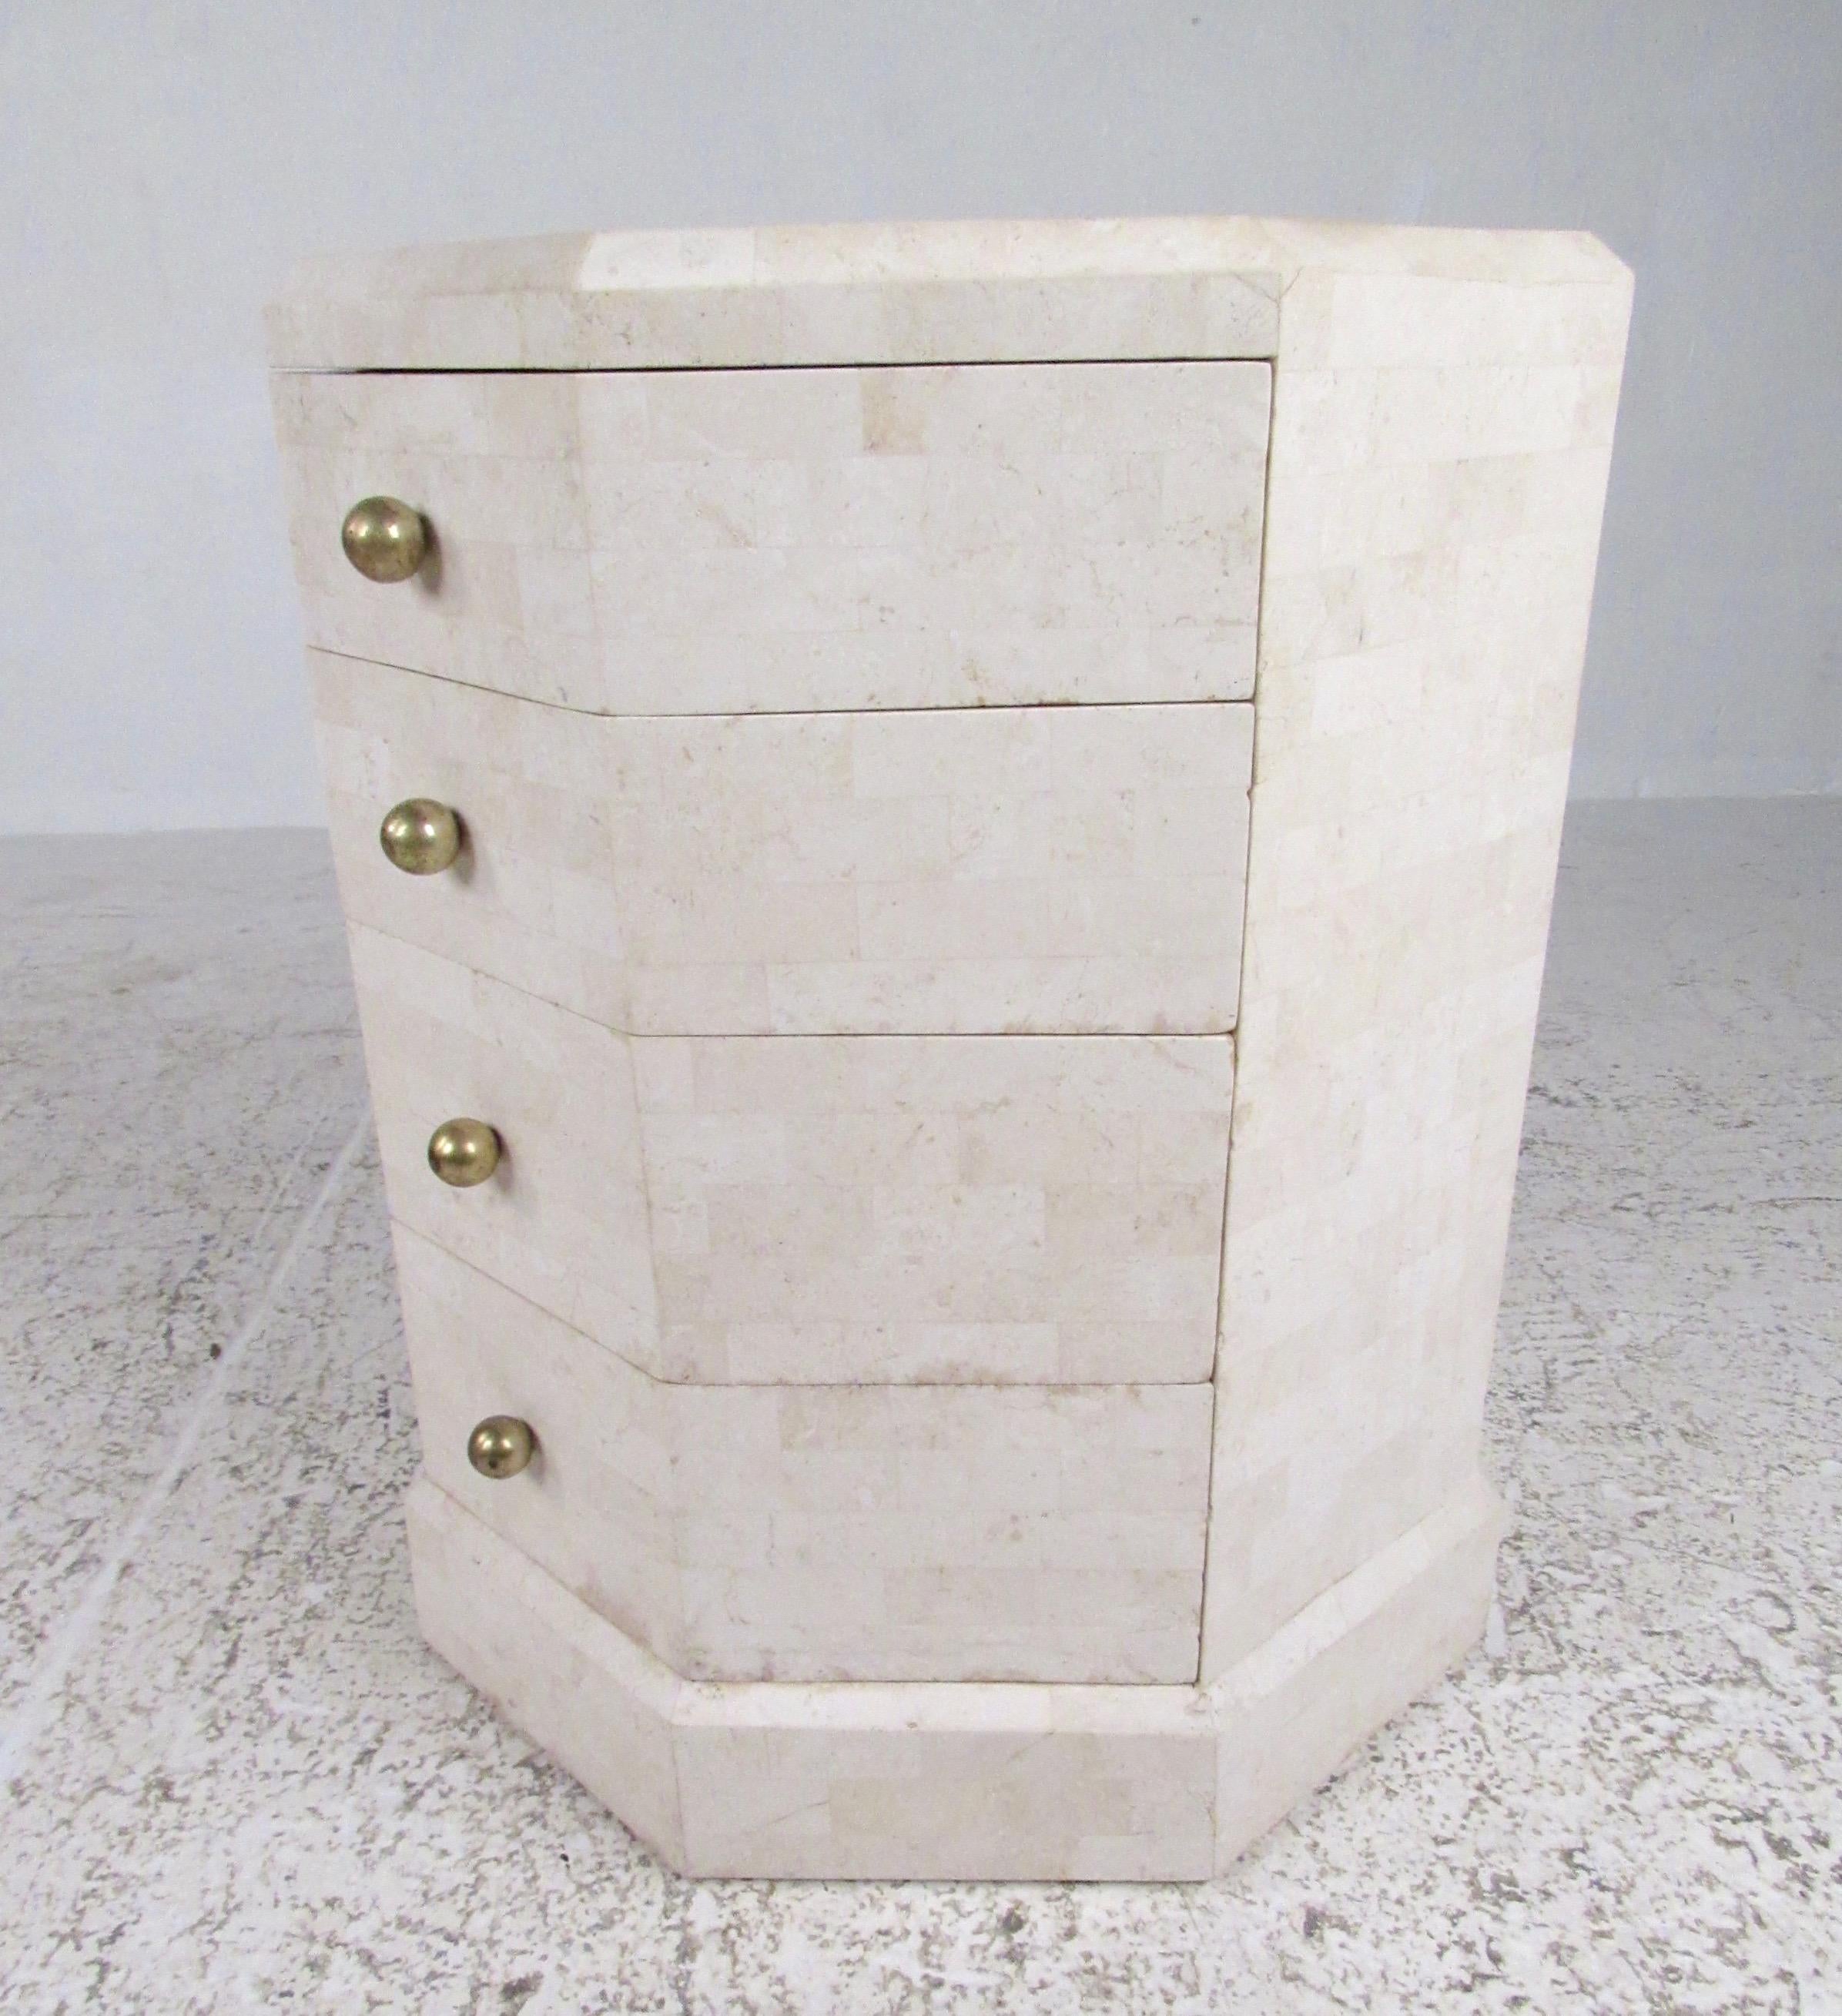 This vintage modern end table features Maitland-Smith tessellated stone finish, brass drawer pulls, and four spacious drawers for storage in any setting. Manufacturers 